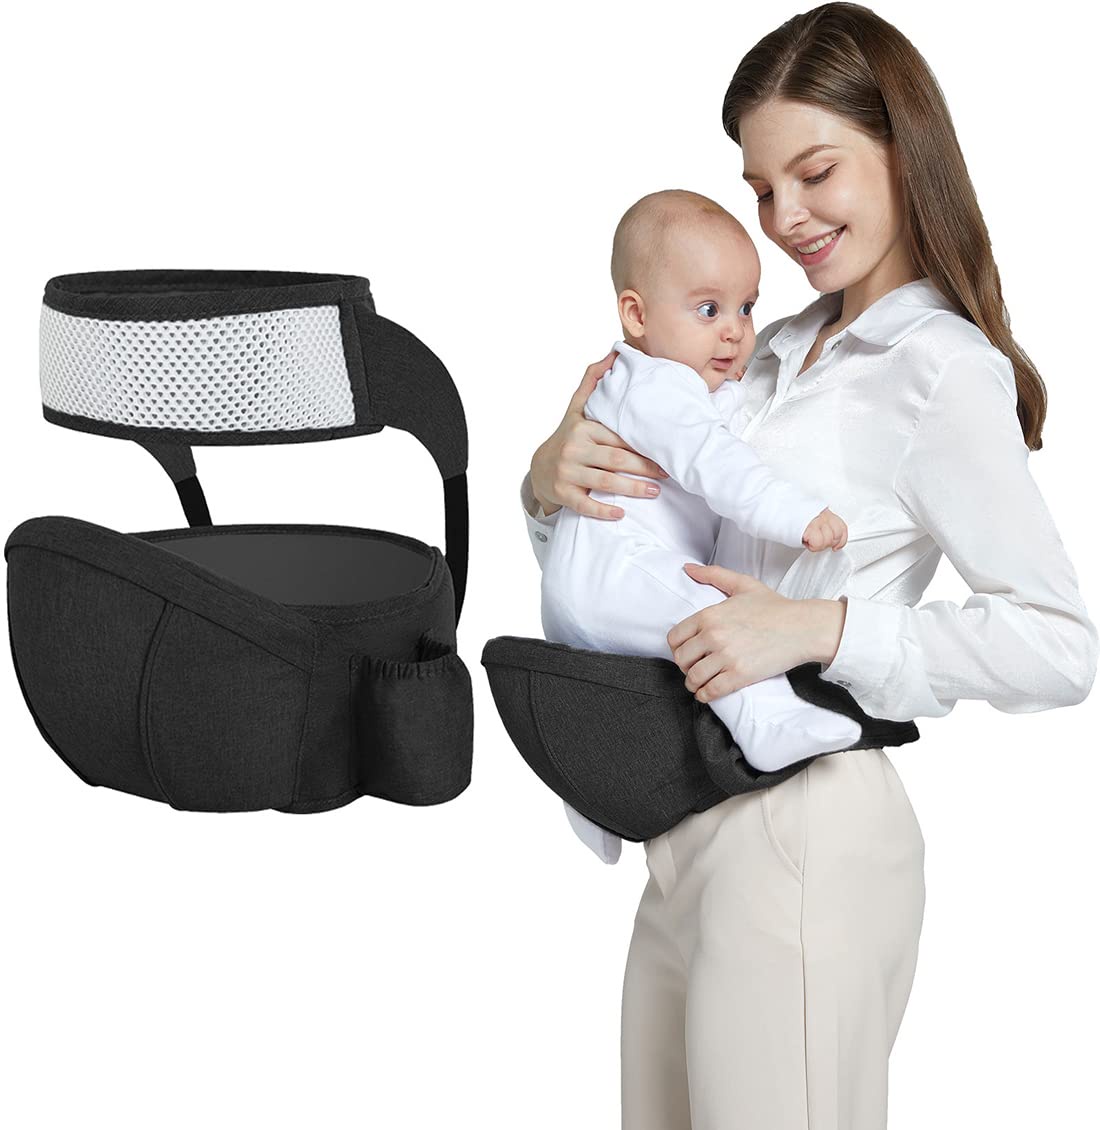 Exploring the Comfort and Convenience of Baby Carrier Waist Stools